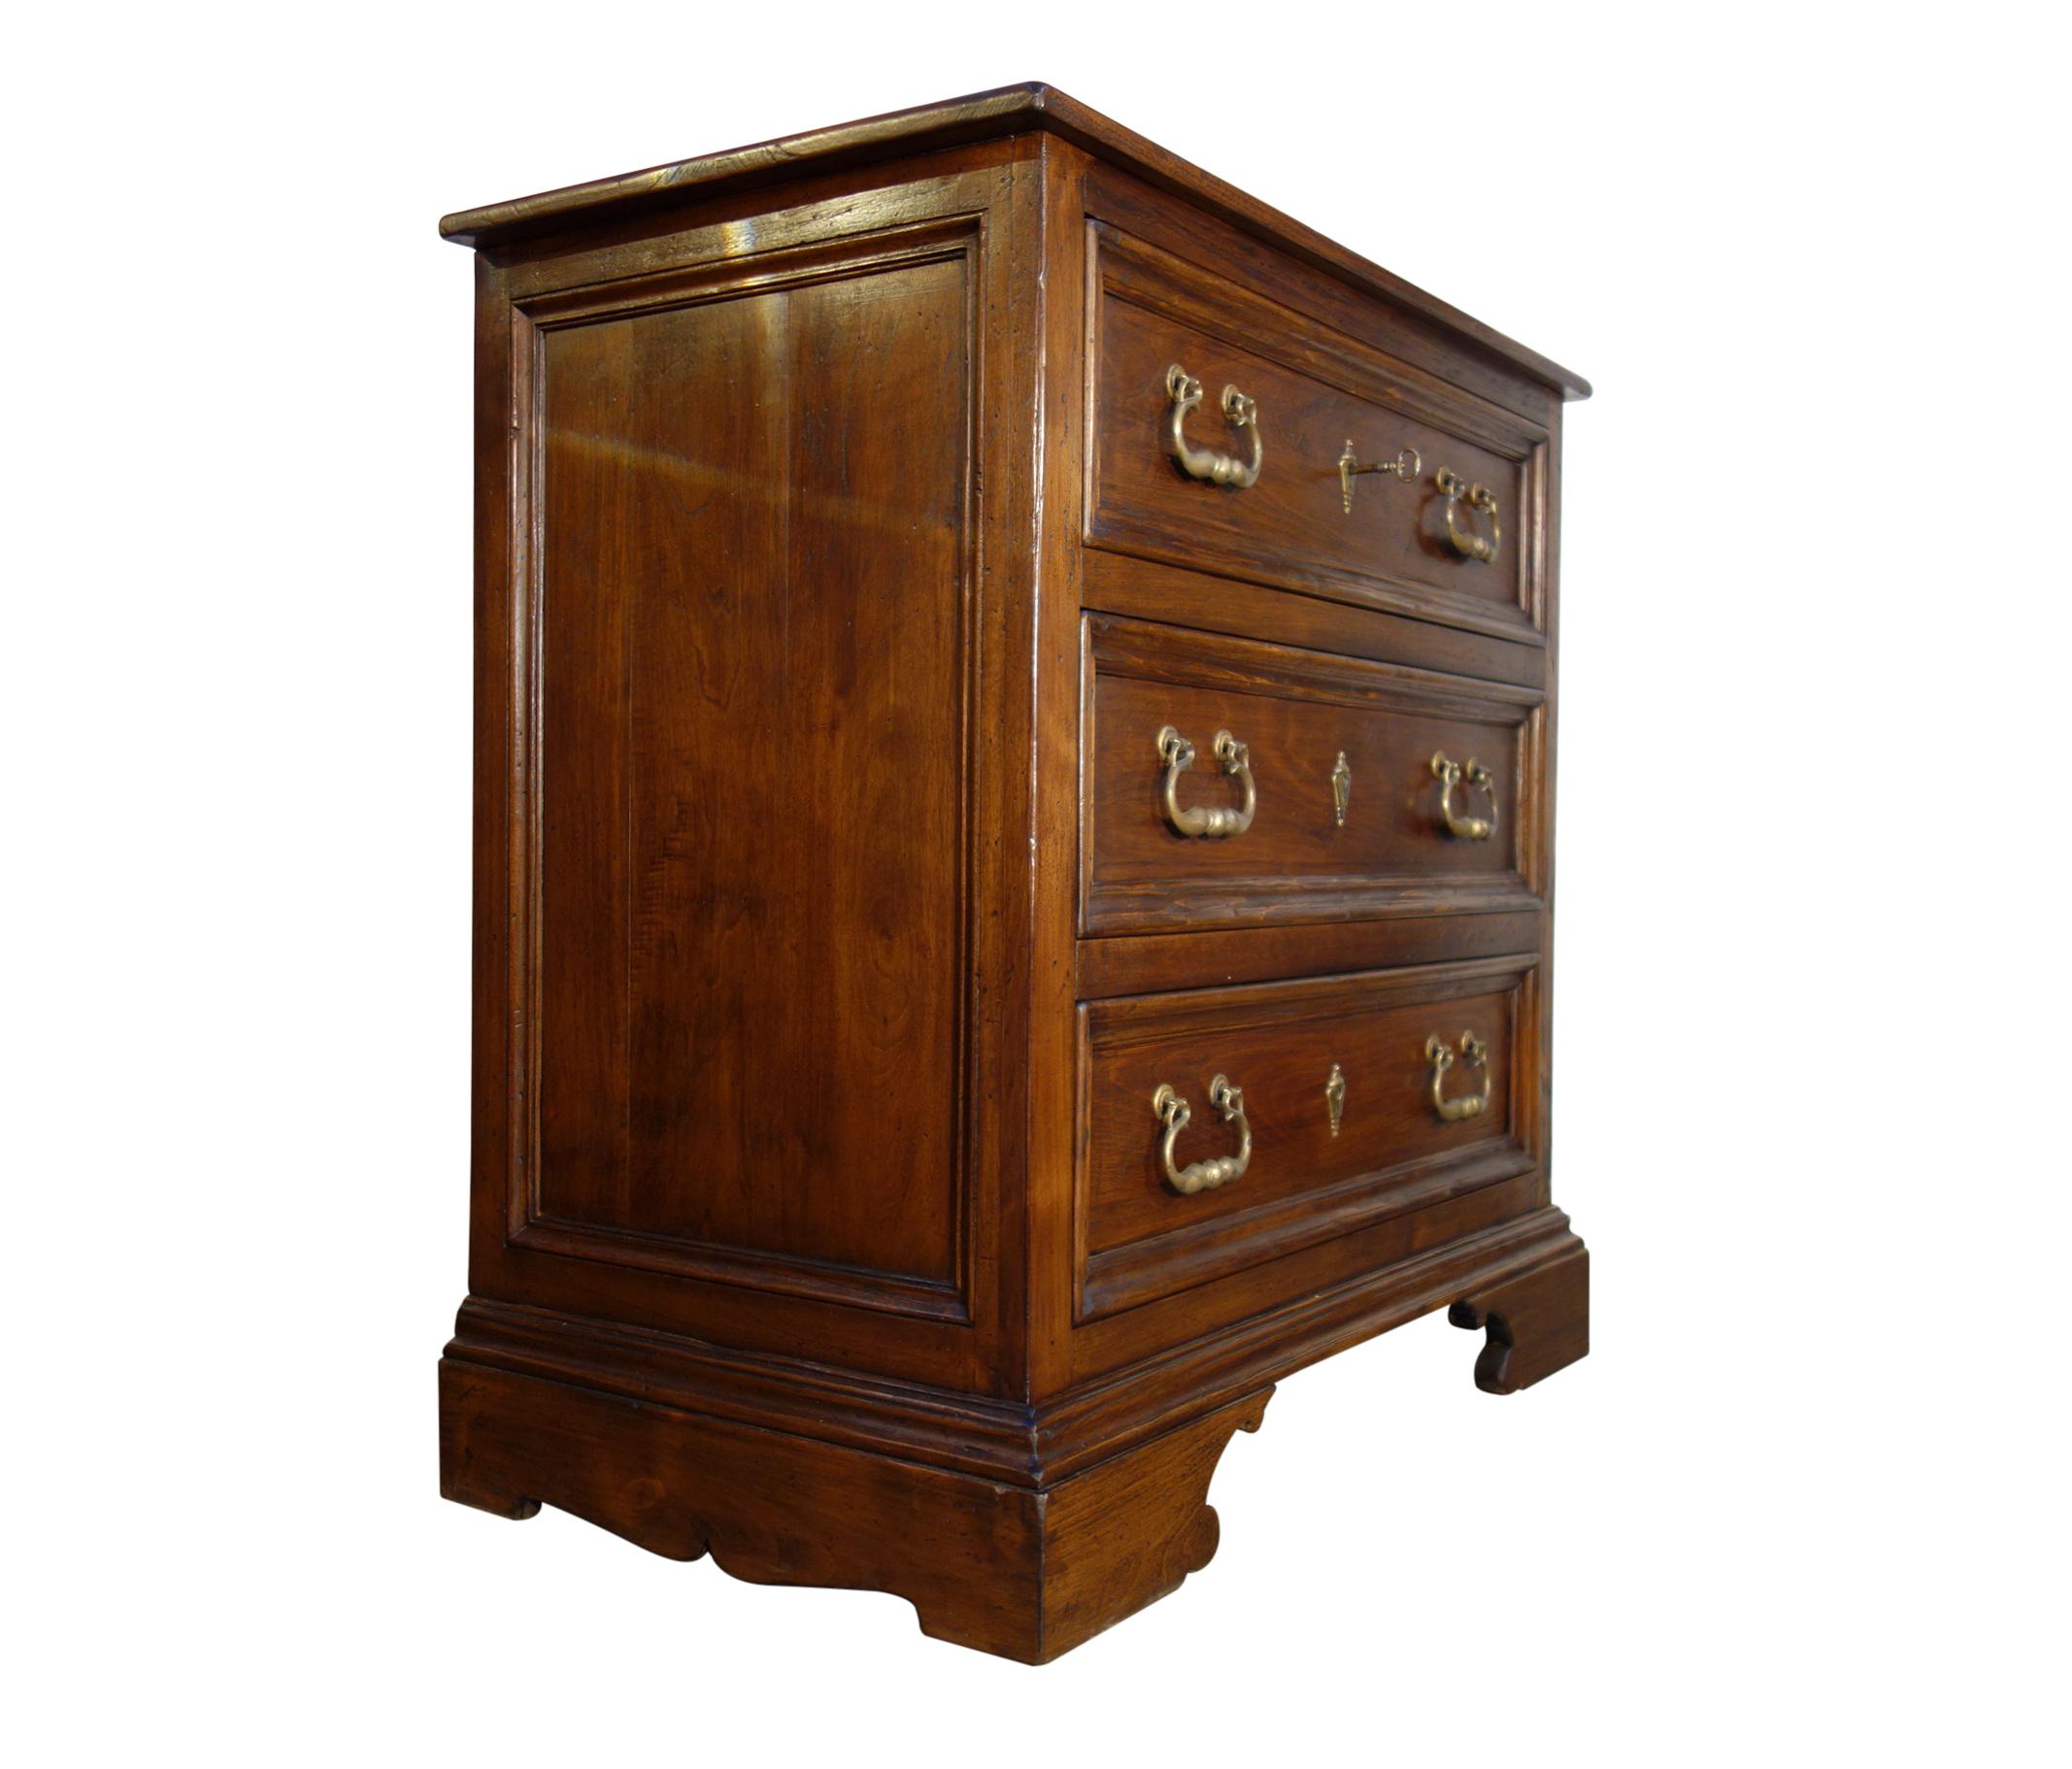 Our “Vernazza” Old Walnut 3-drawer dresser - The Italian Art & Handcraft of fine custom antique reproduction. Available in custom size and configuration by quote - handmade to order in Italy.

Our Mediterranean style handcrafted dresser (floor